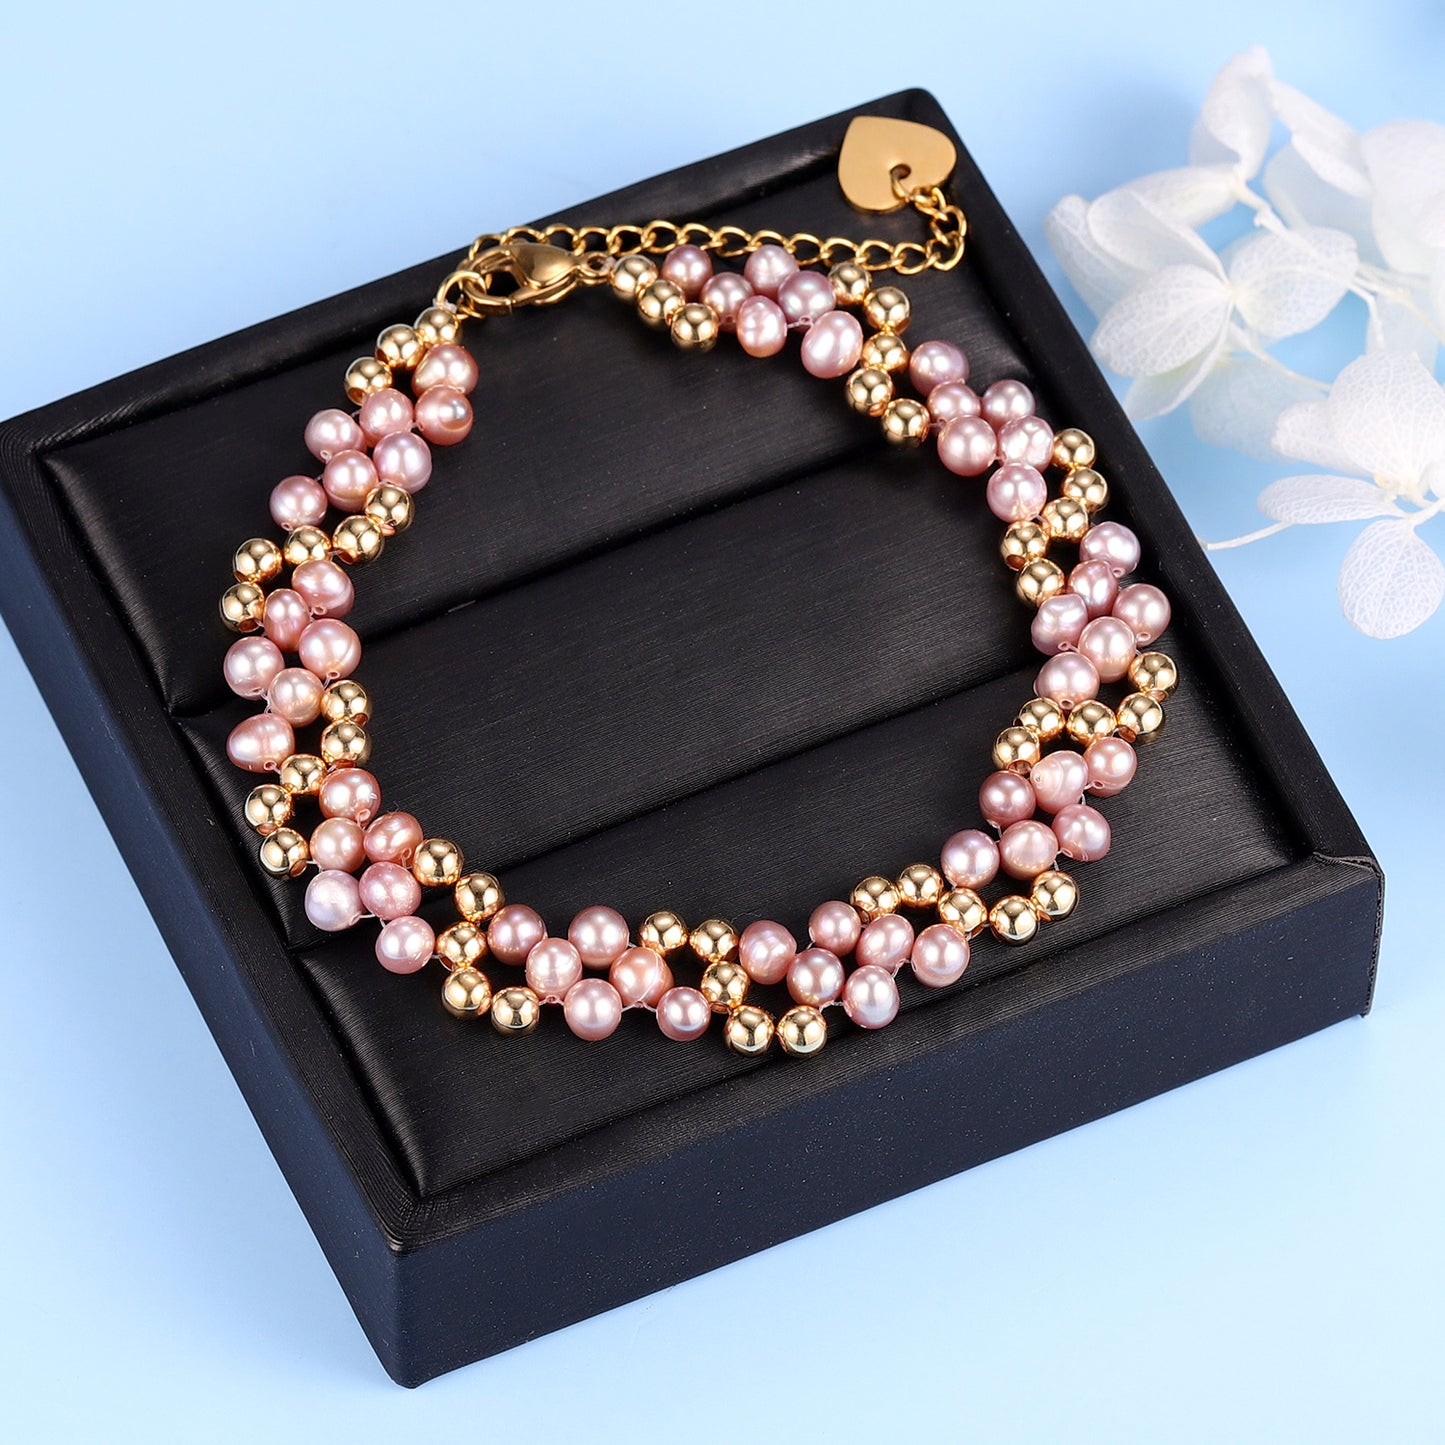 SAFANAH - Natural Freshwater Pearl Beads Bracelet - Gold Jewellery gifts